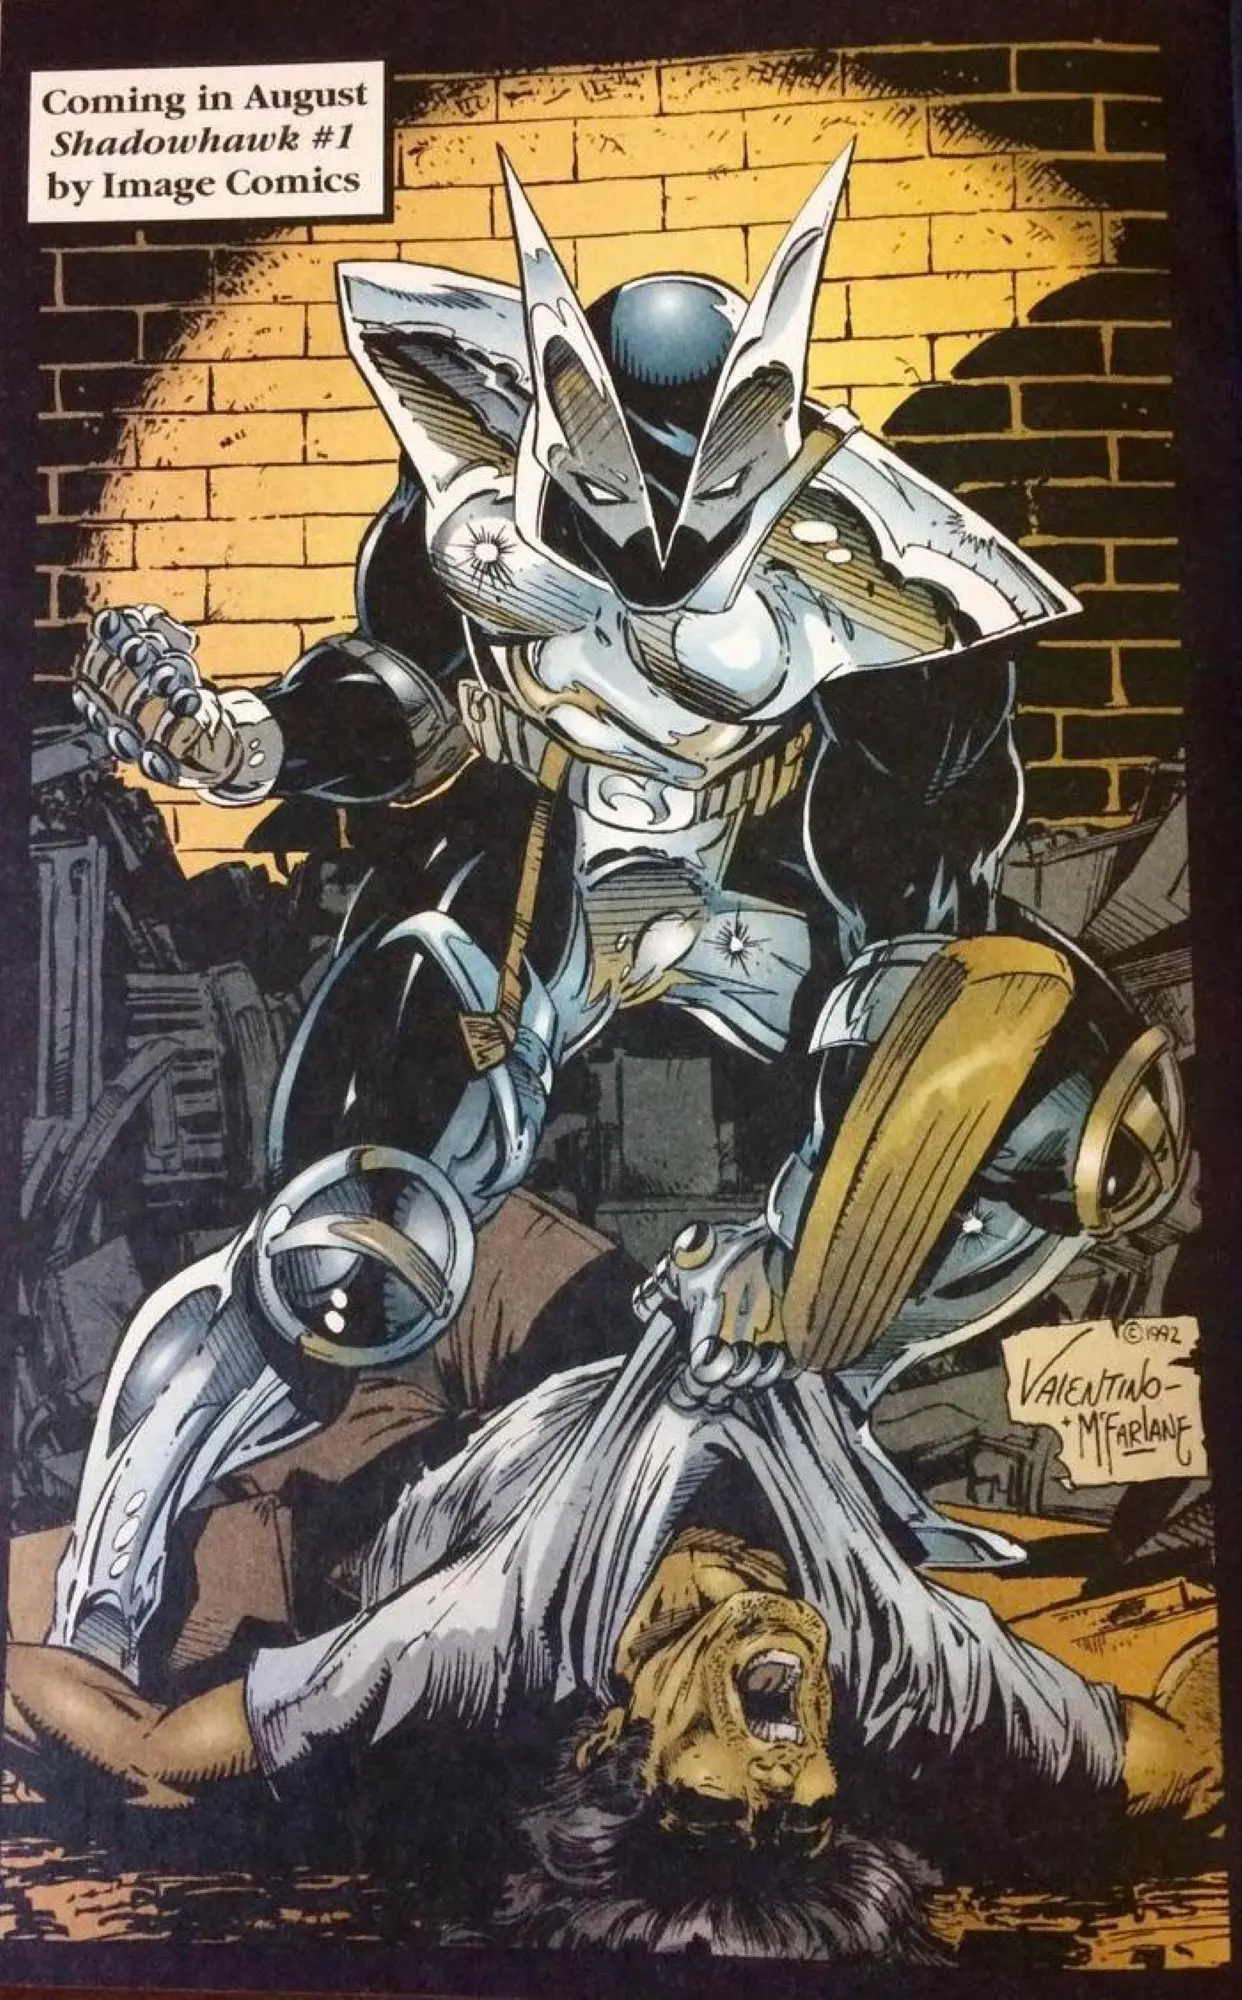 The troubled origins of Paul Johnstone - the most popular Shadowhawk!